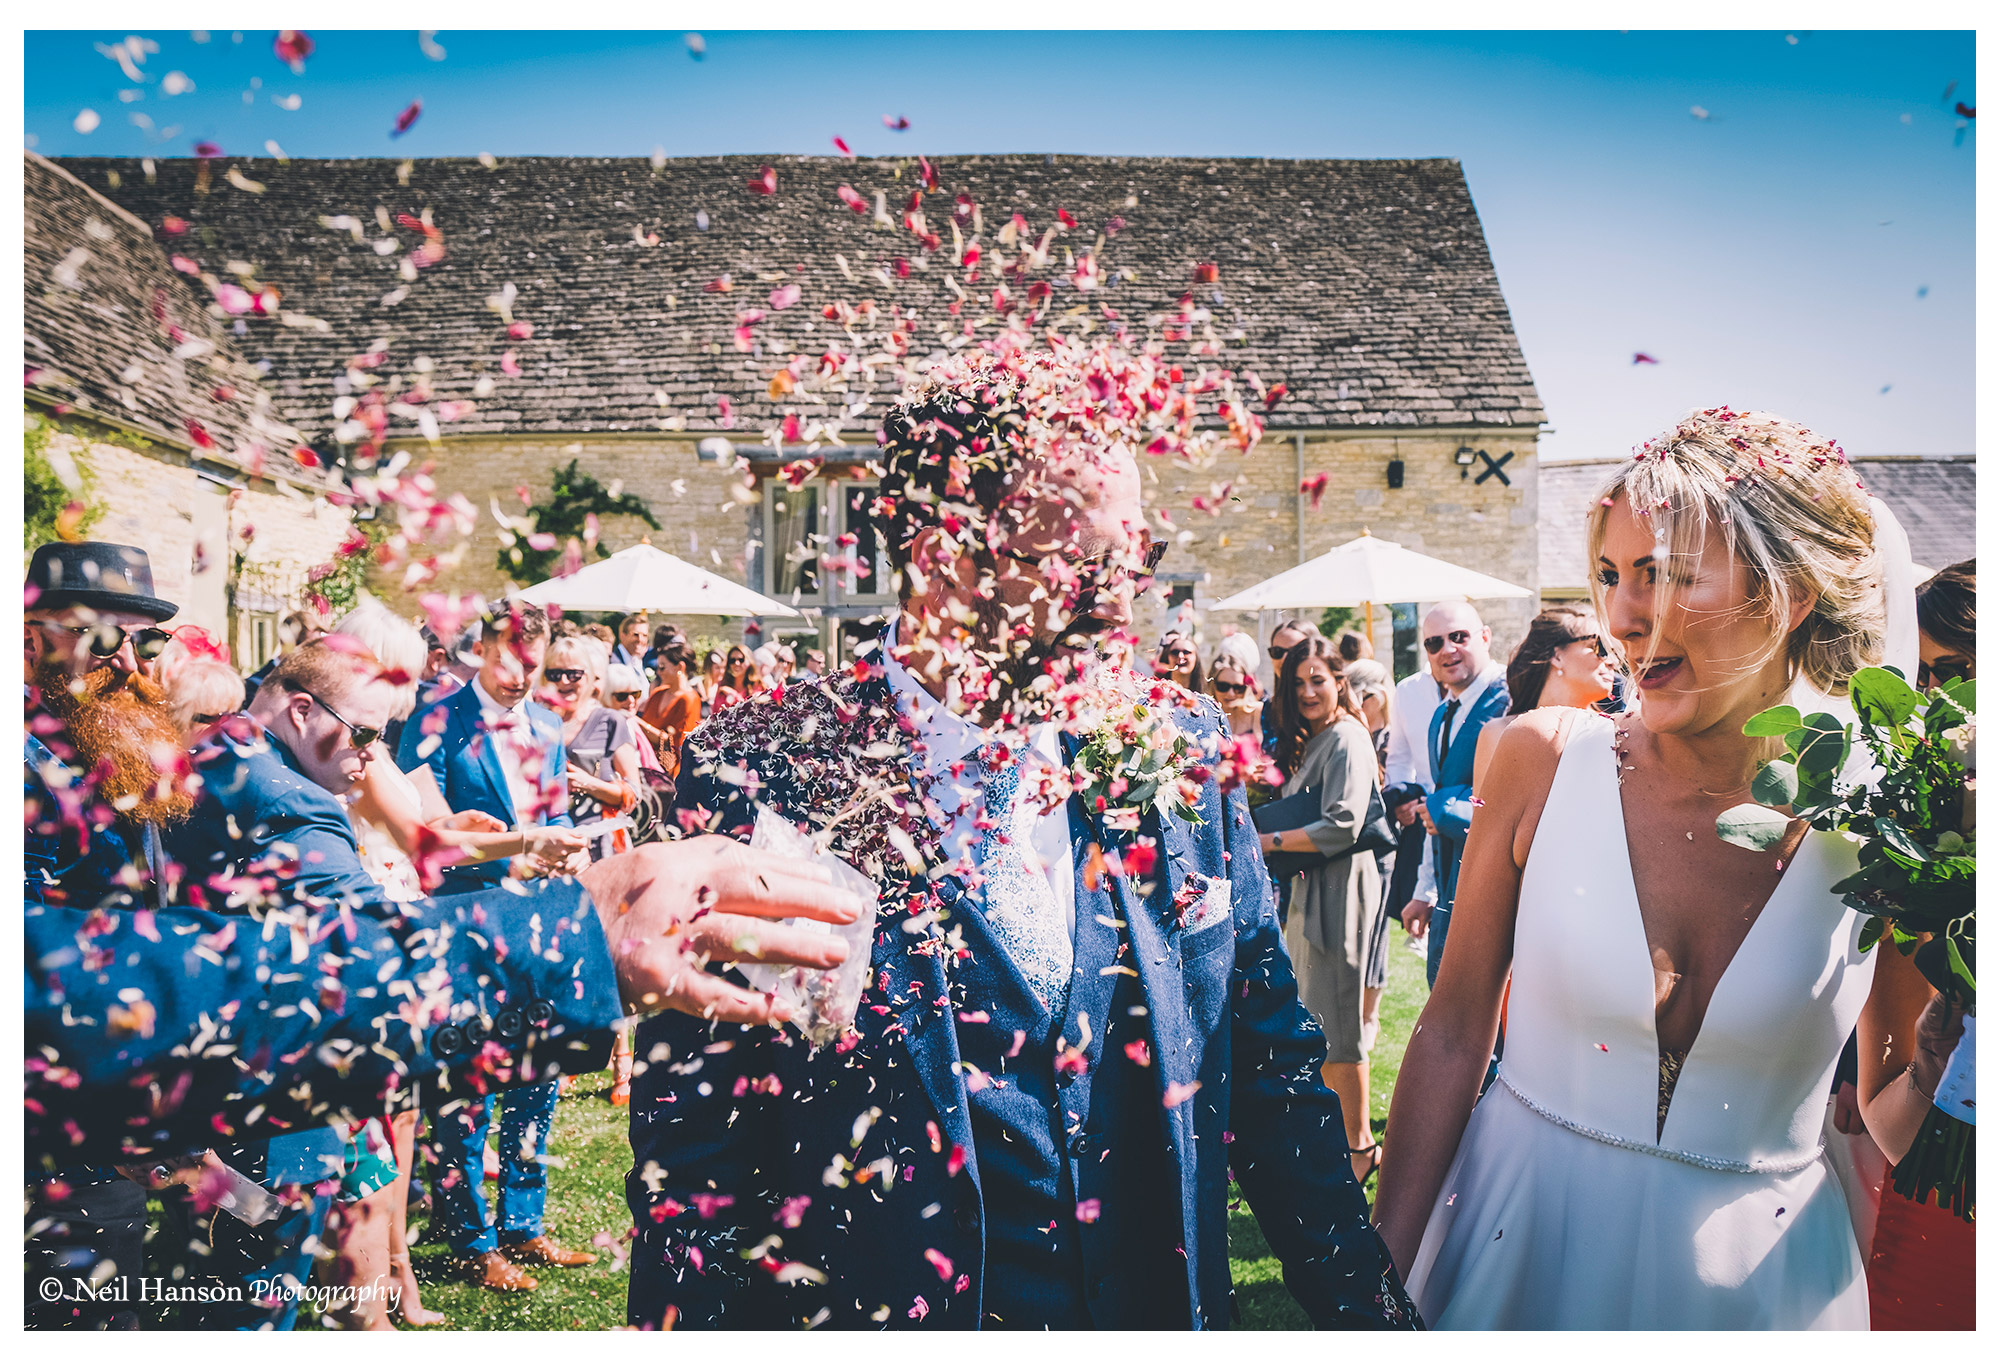 Confetti in the face for the groom at Caswell House